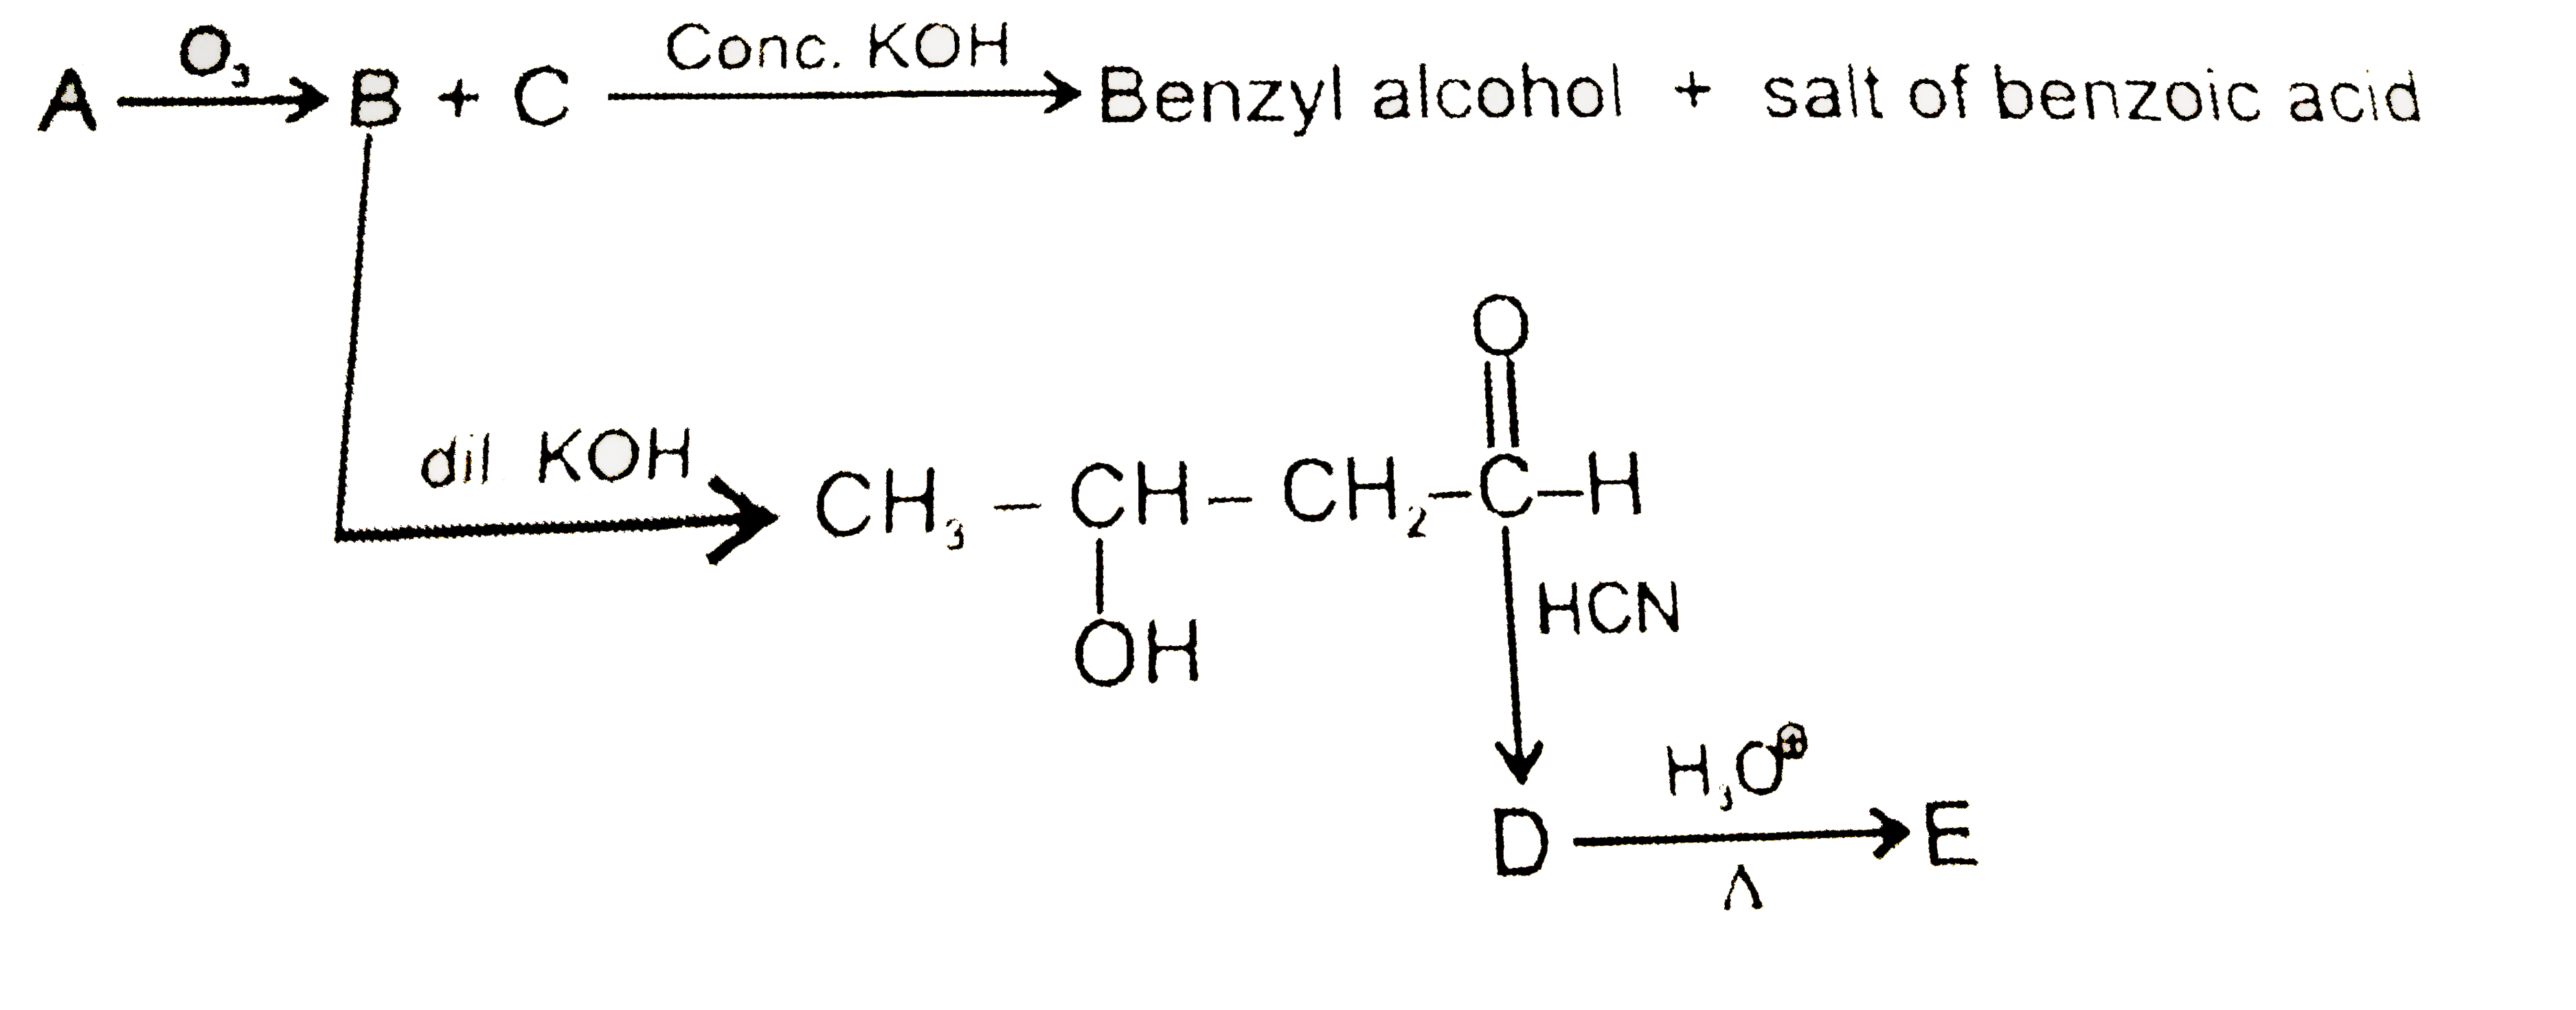 Structure of (B) and (C) differentiated by